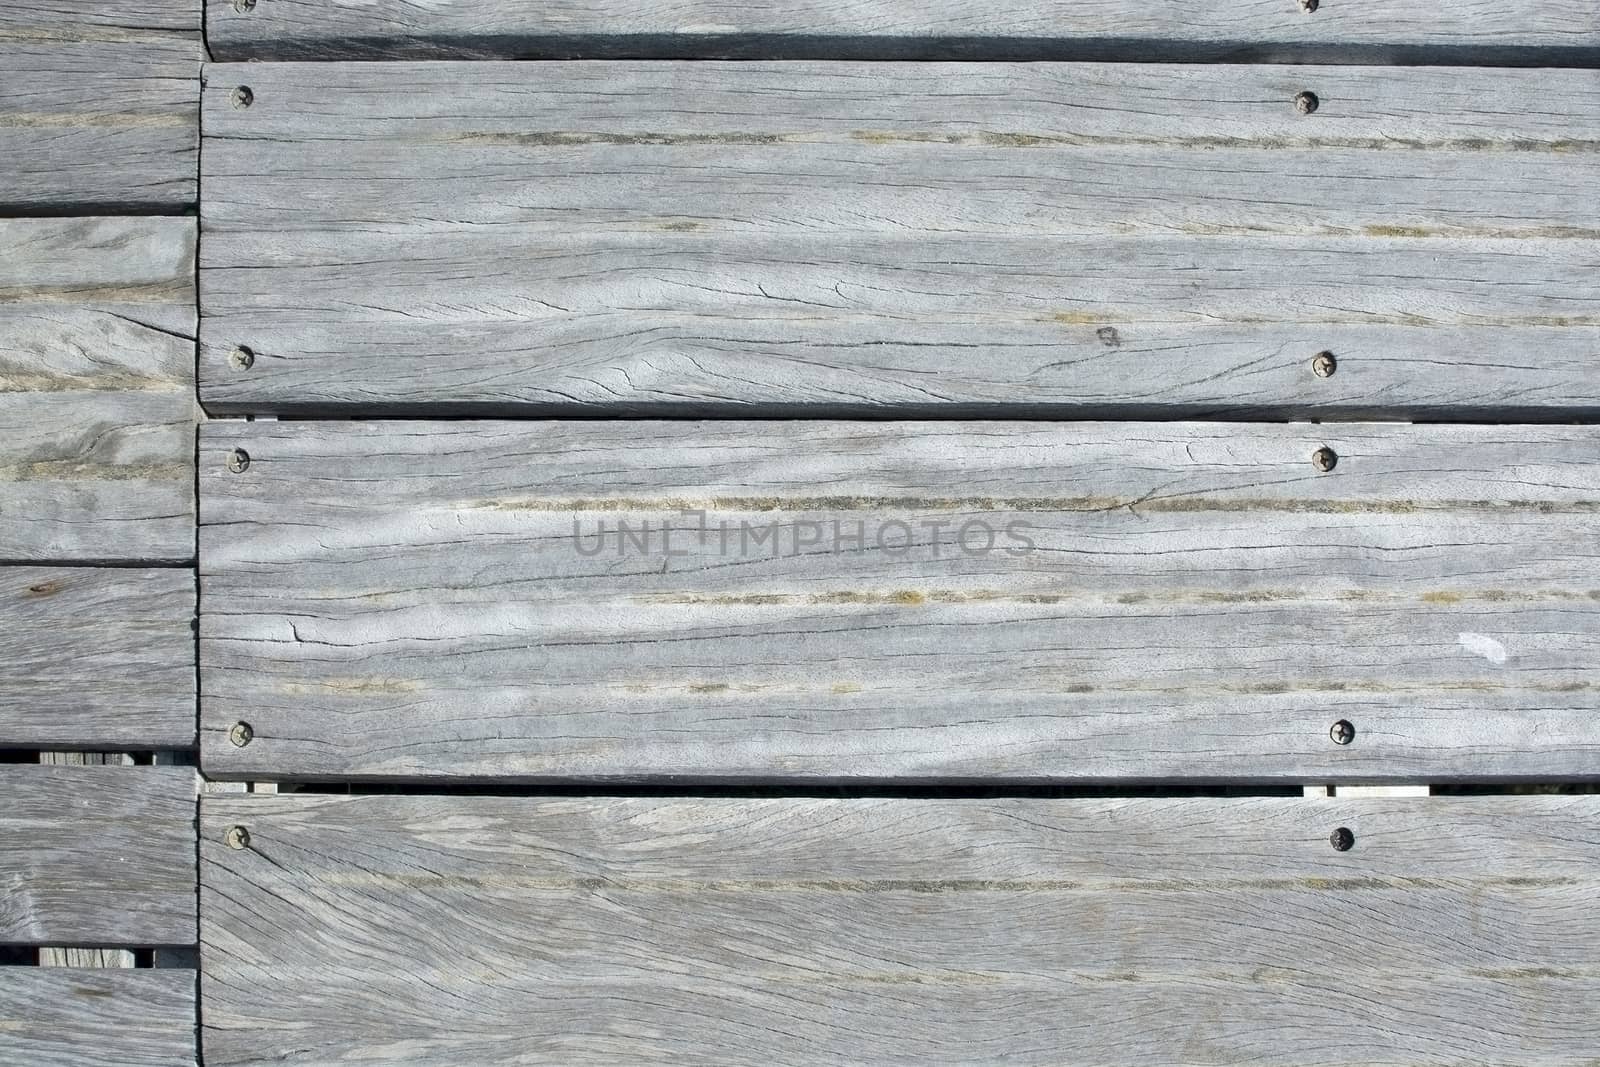 Soft gray brown wood board background texture with lined planks